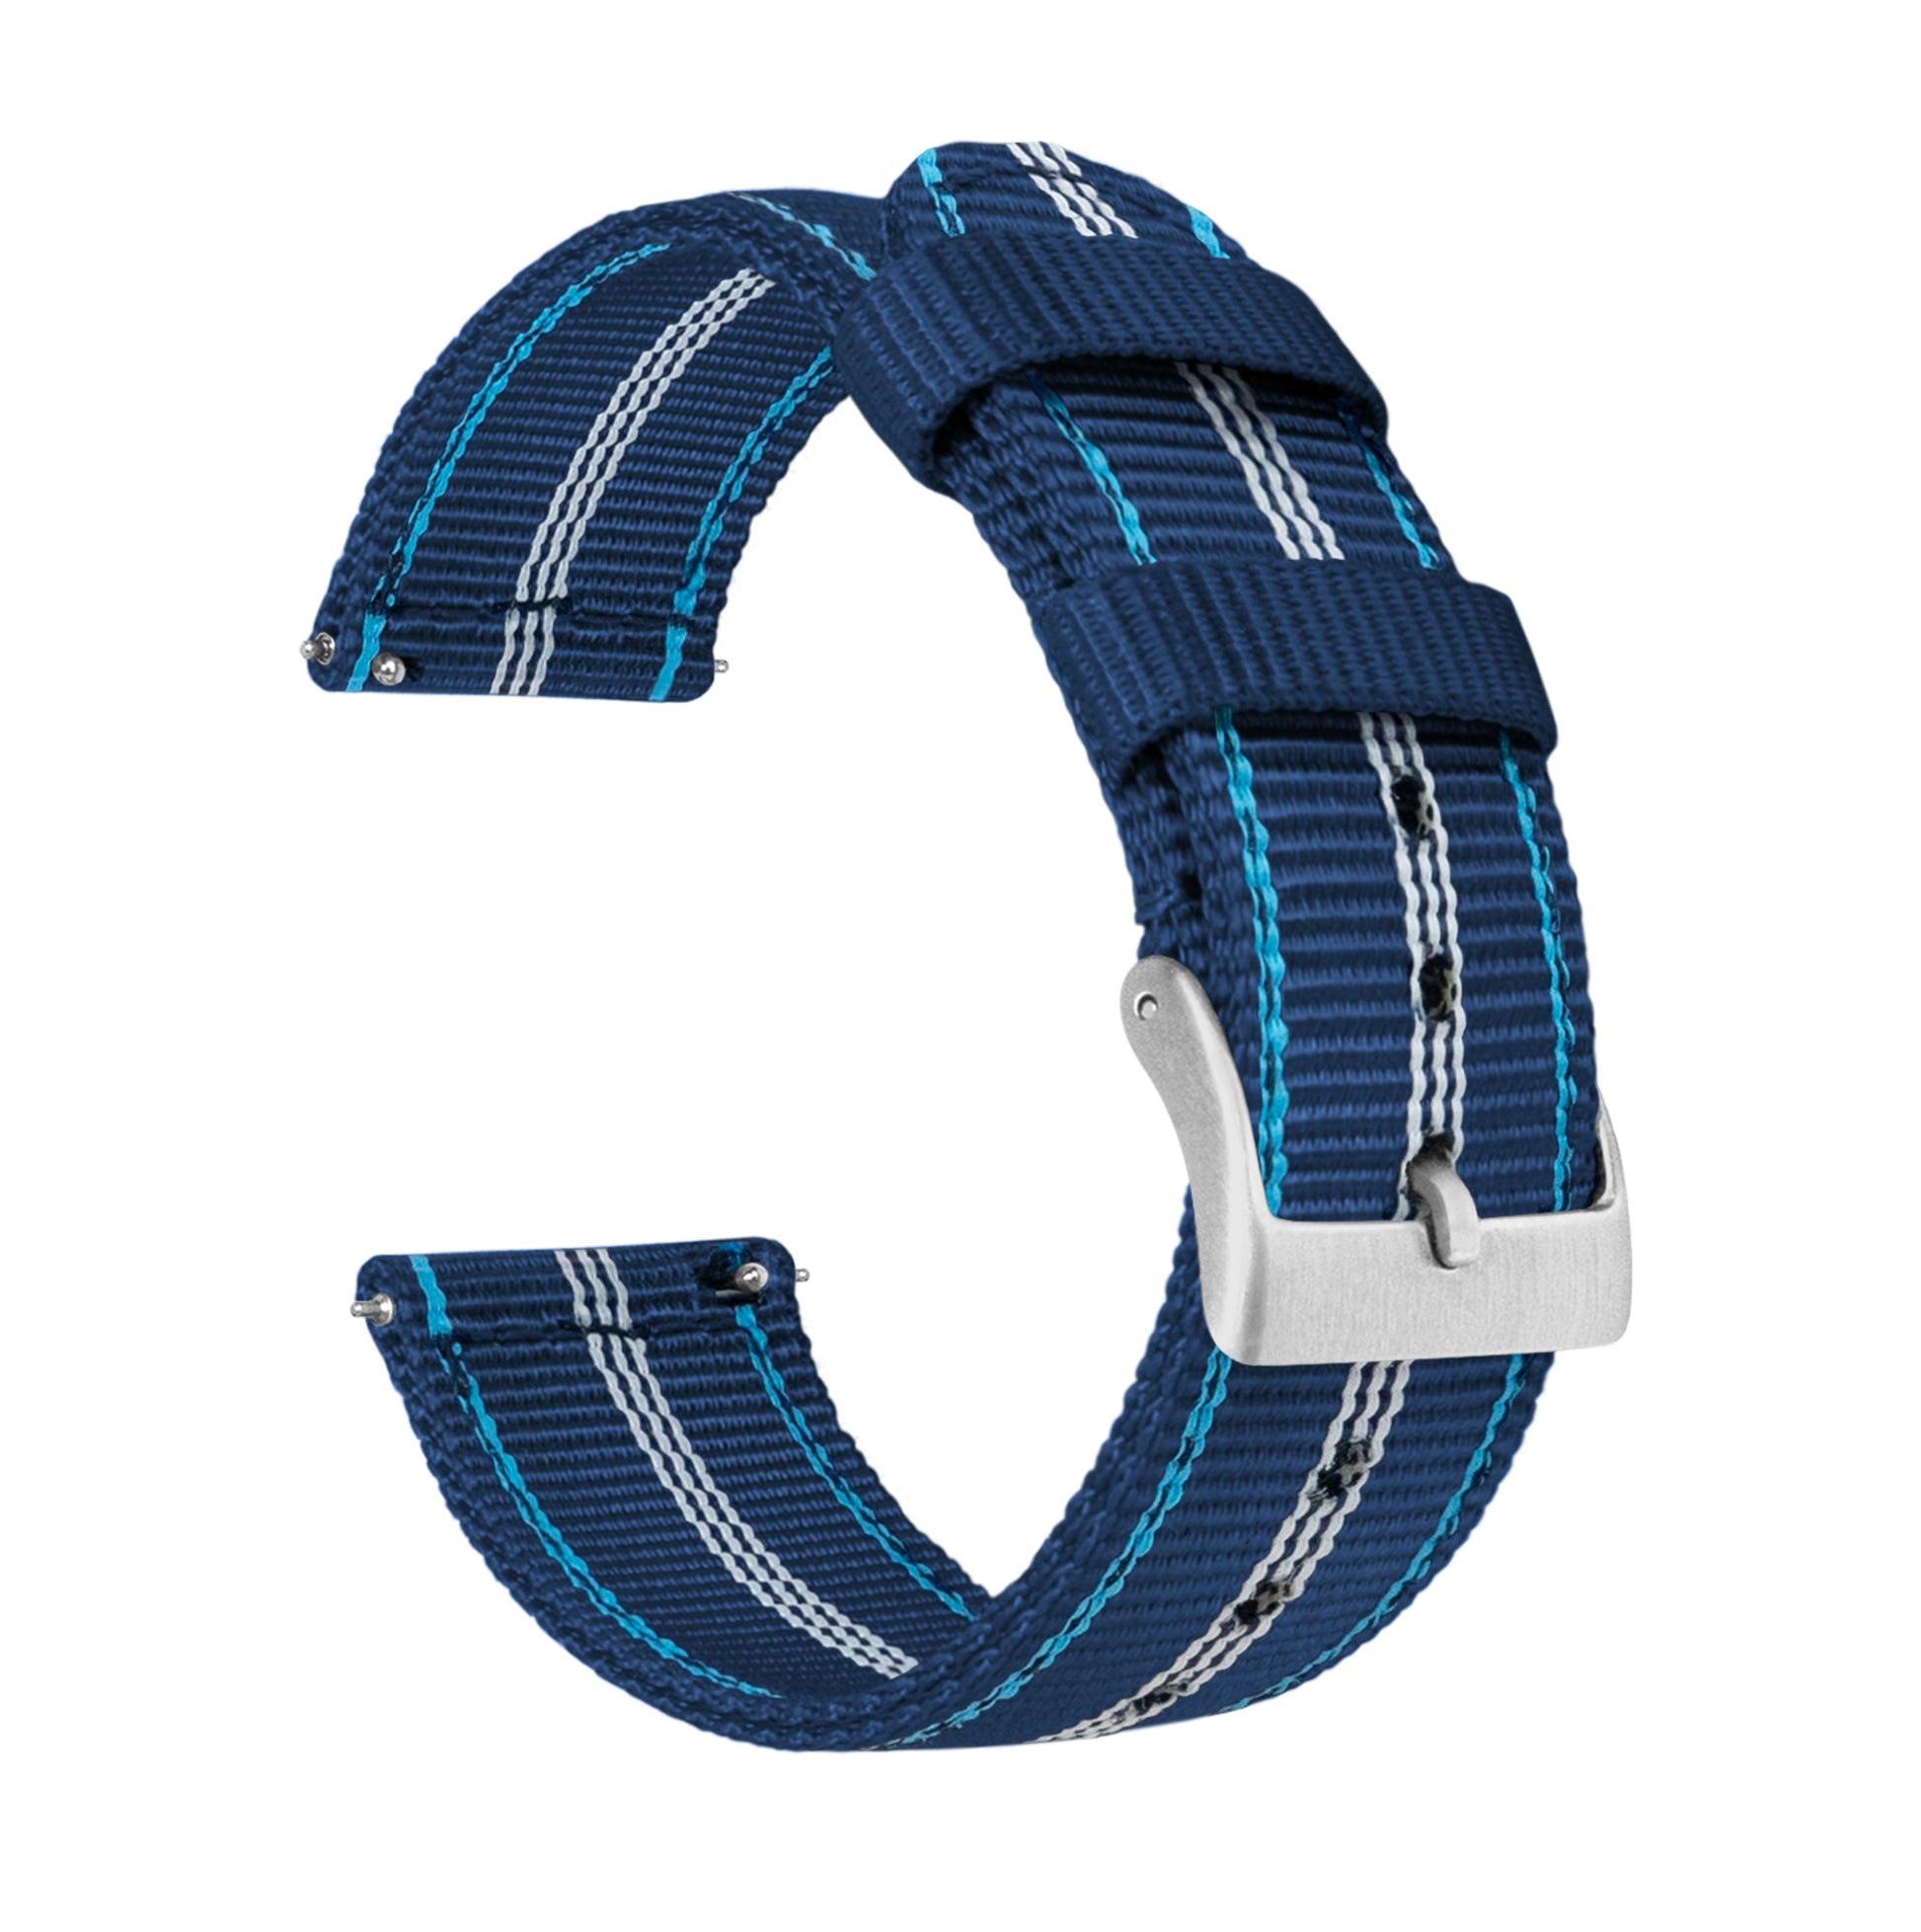 Withings Nokia Activité and Steel HR | Two-Piece NATO Style | Navy & Aqua Blue - Barton Watch Bands